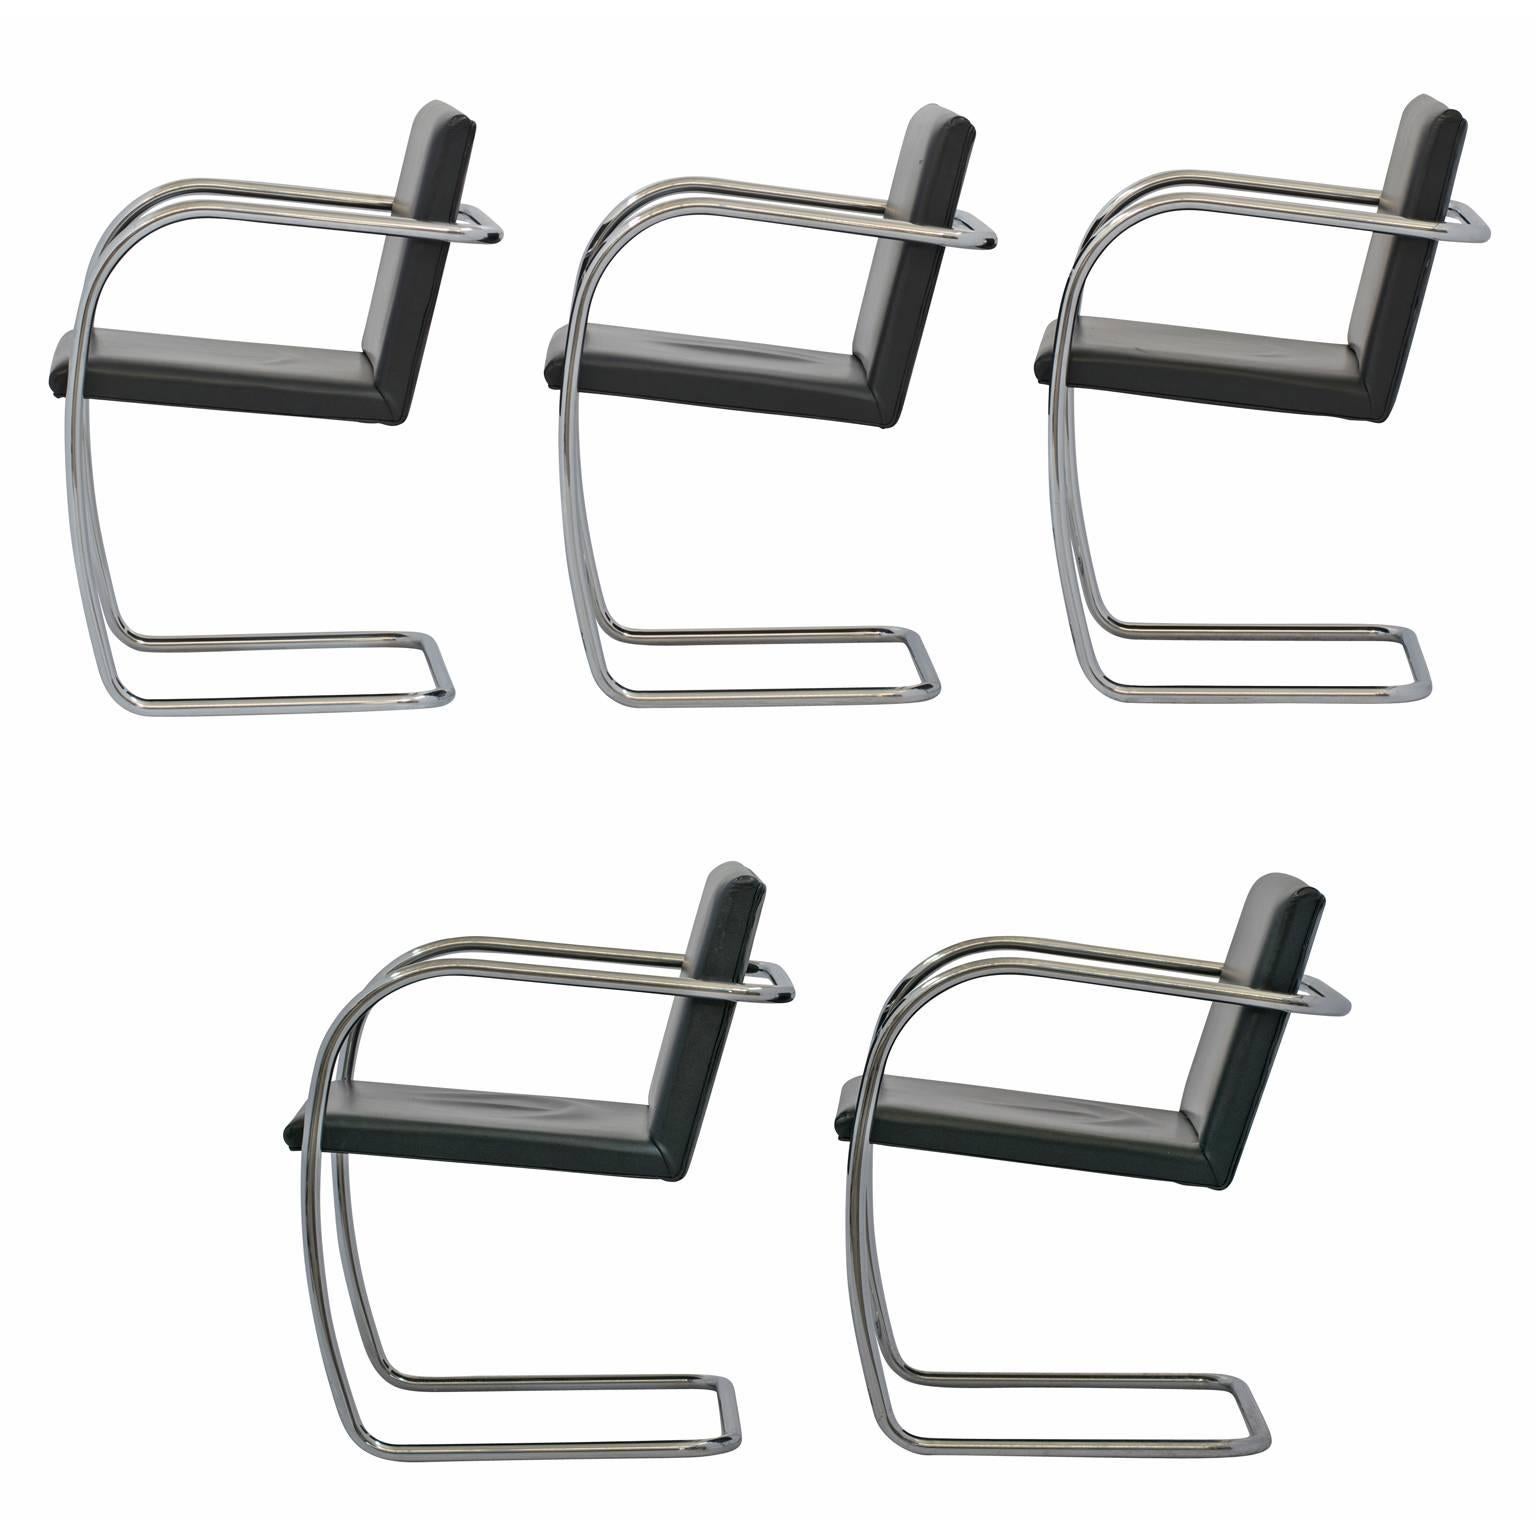 Set of five Brno style chairs, in the manner of Mies van der Rohe’s iconic, cantilevered chairs in leather and tubular steel. This set of Brno style cantilevered chairs features frames formed from a single piece of bent tubular steel with chrome